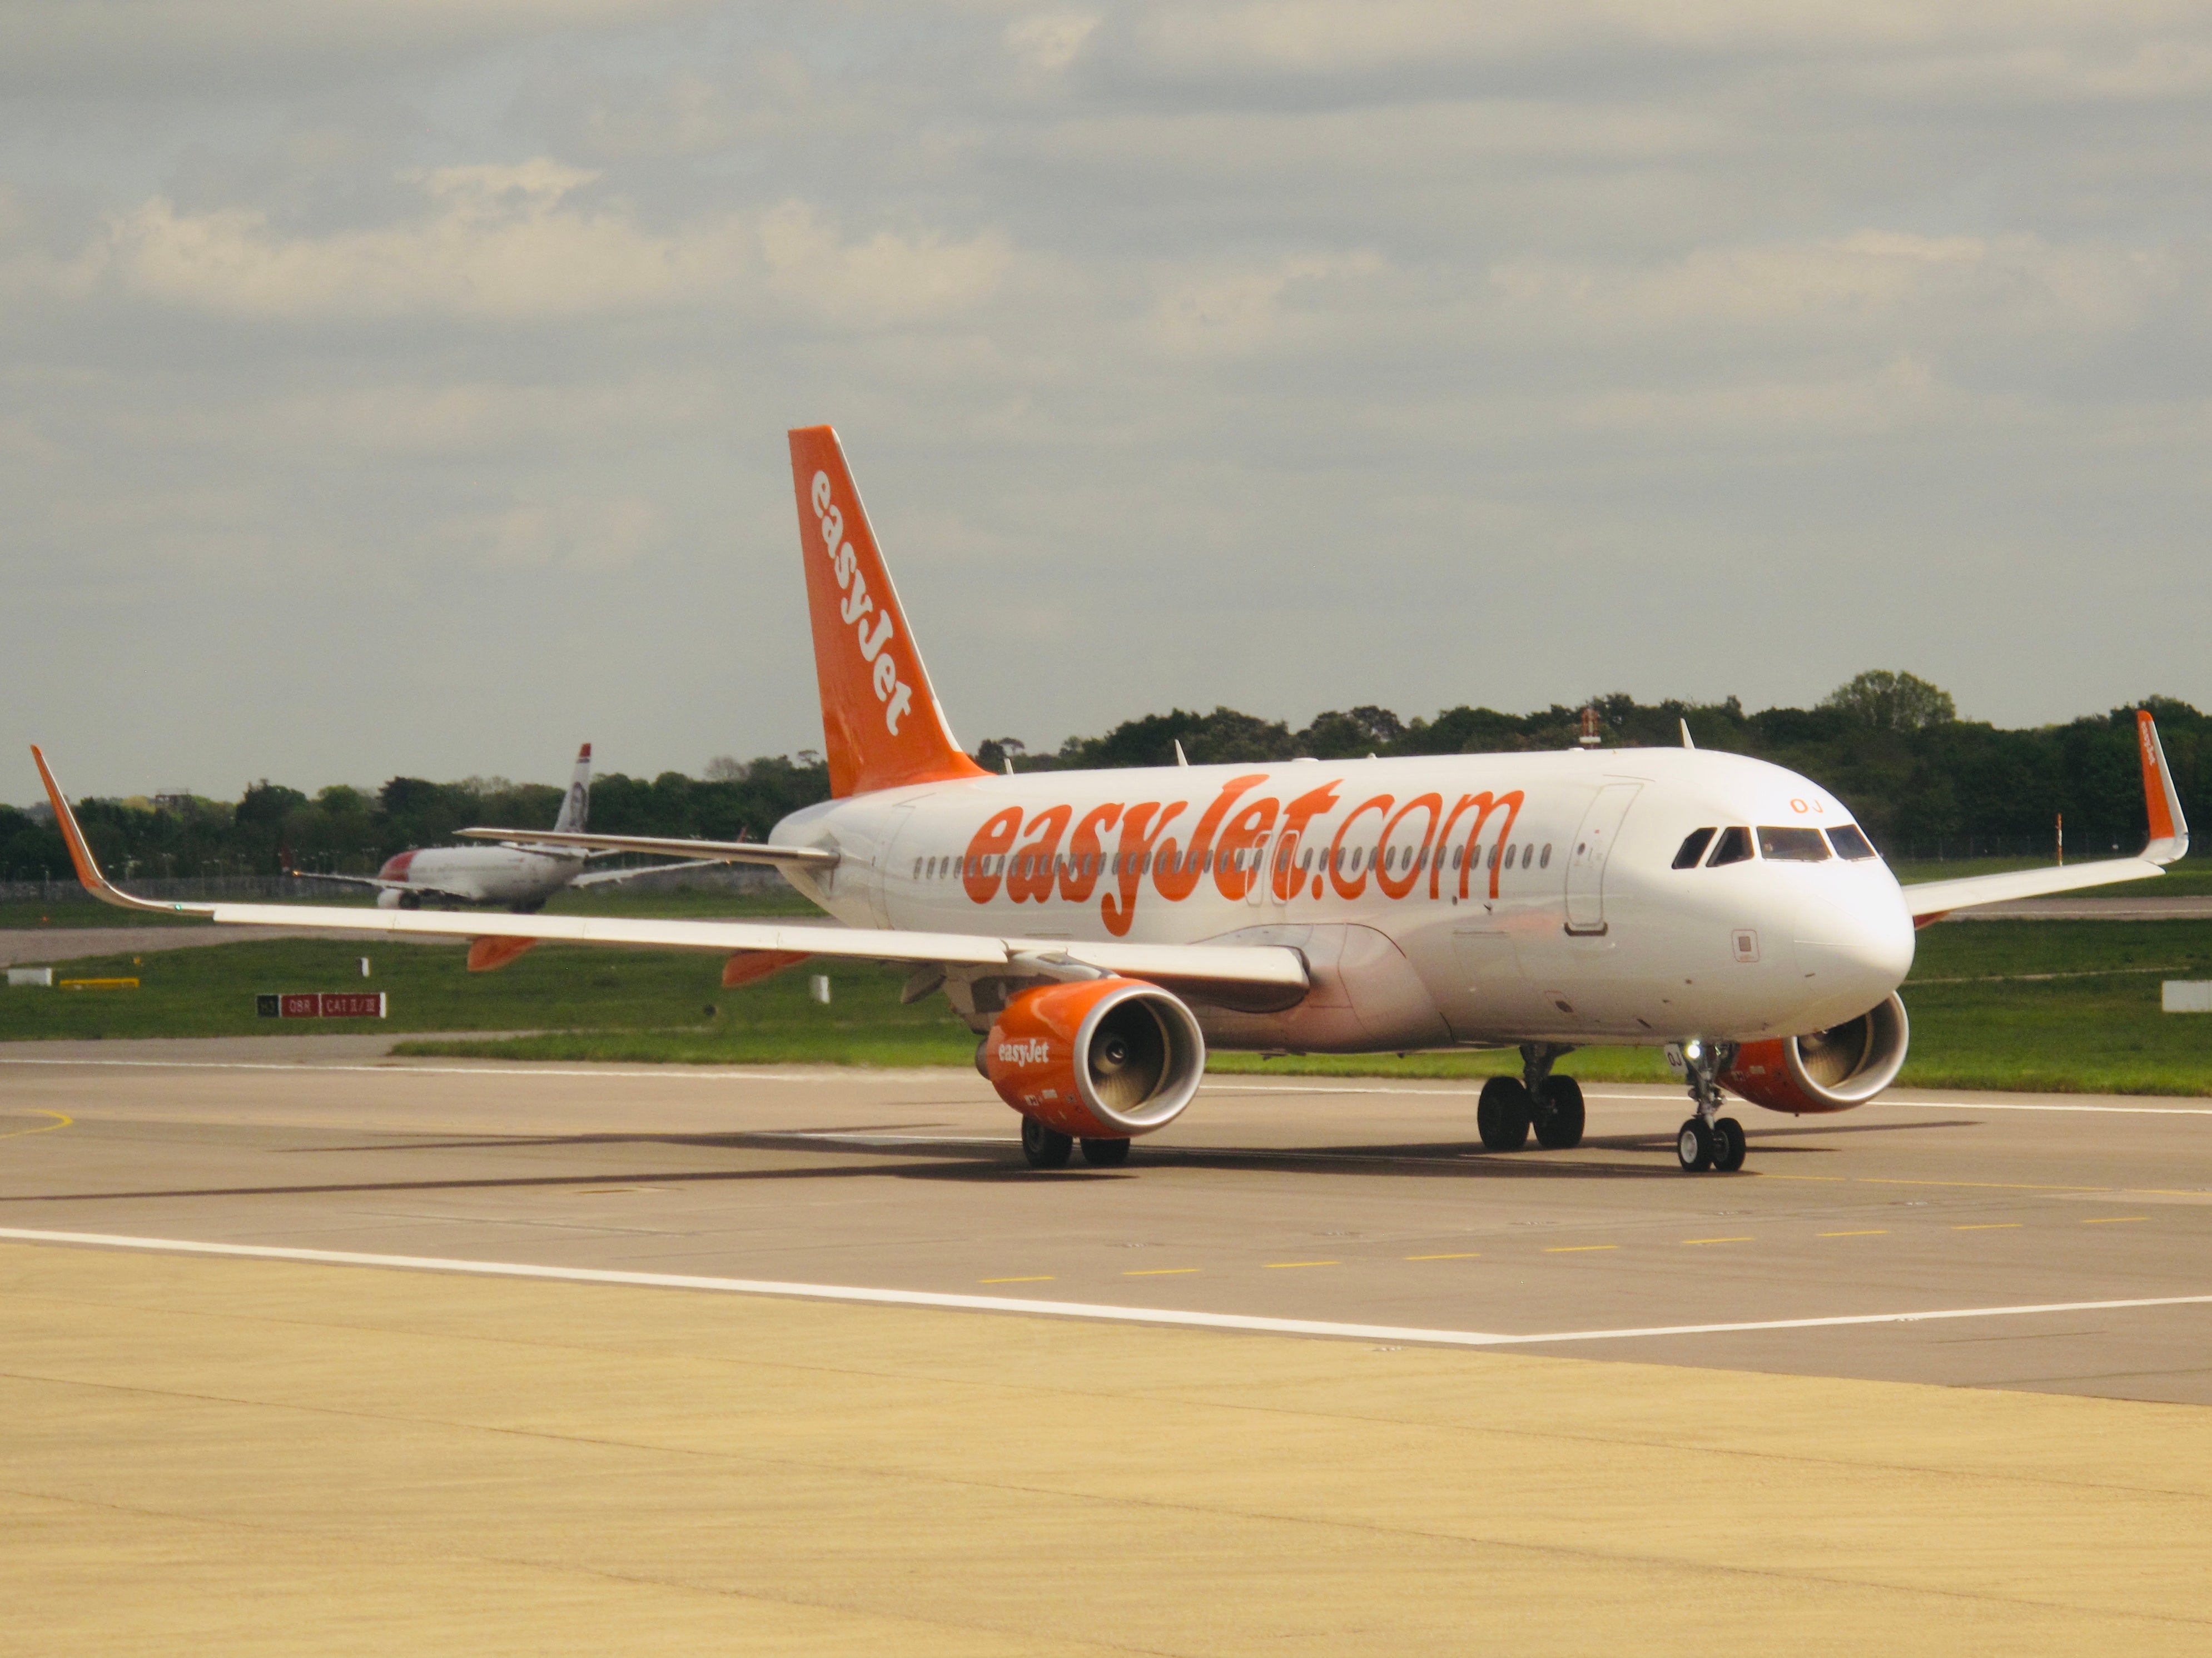 Sunny outlook: easyJet Airbus at London Gatwick airport, the airline’s main hub